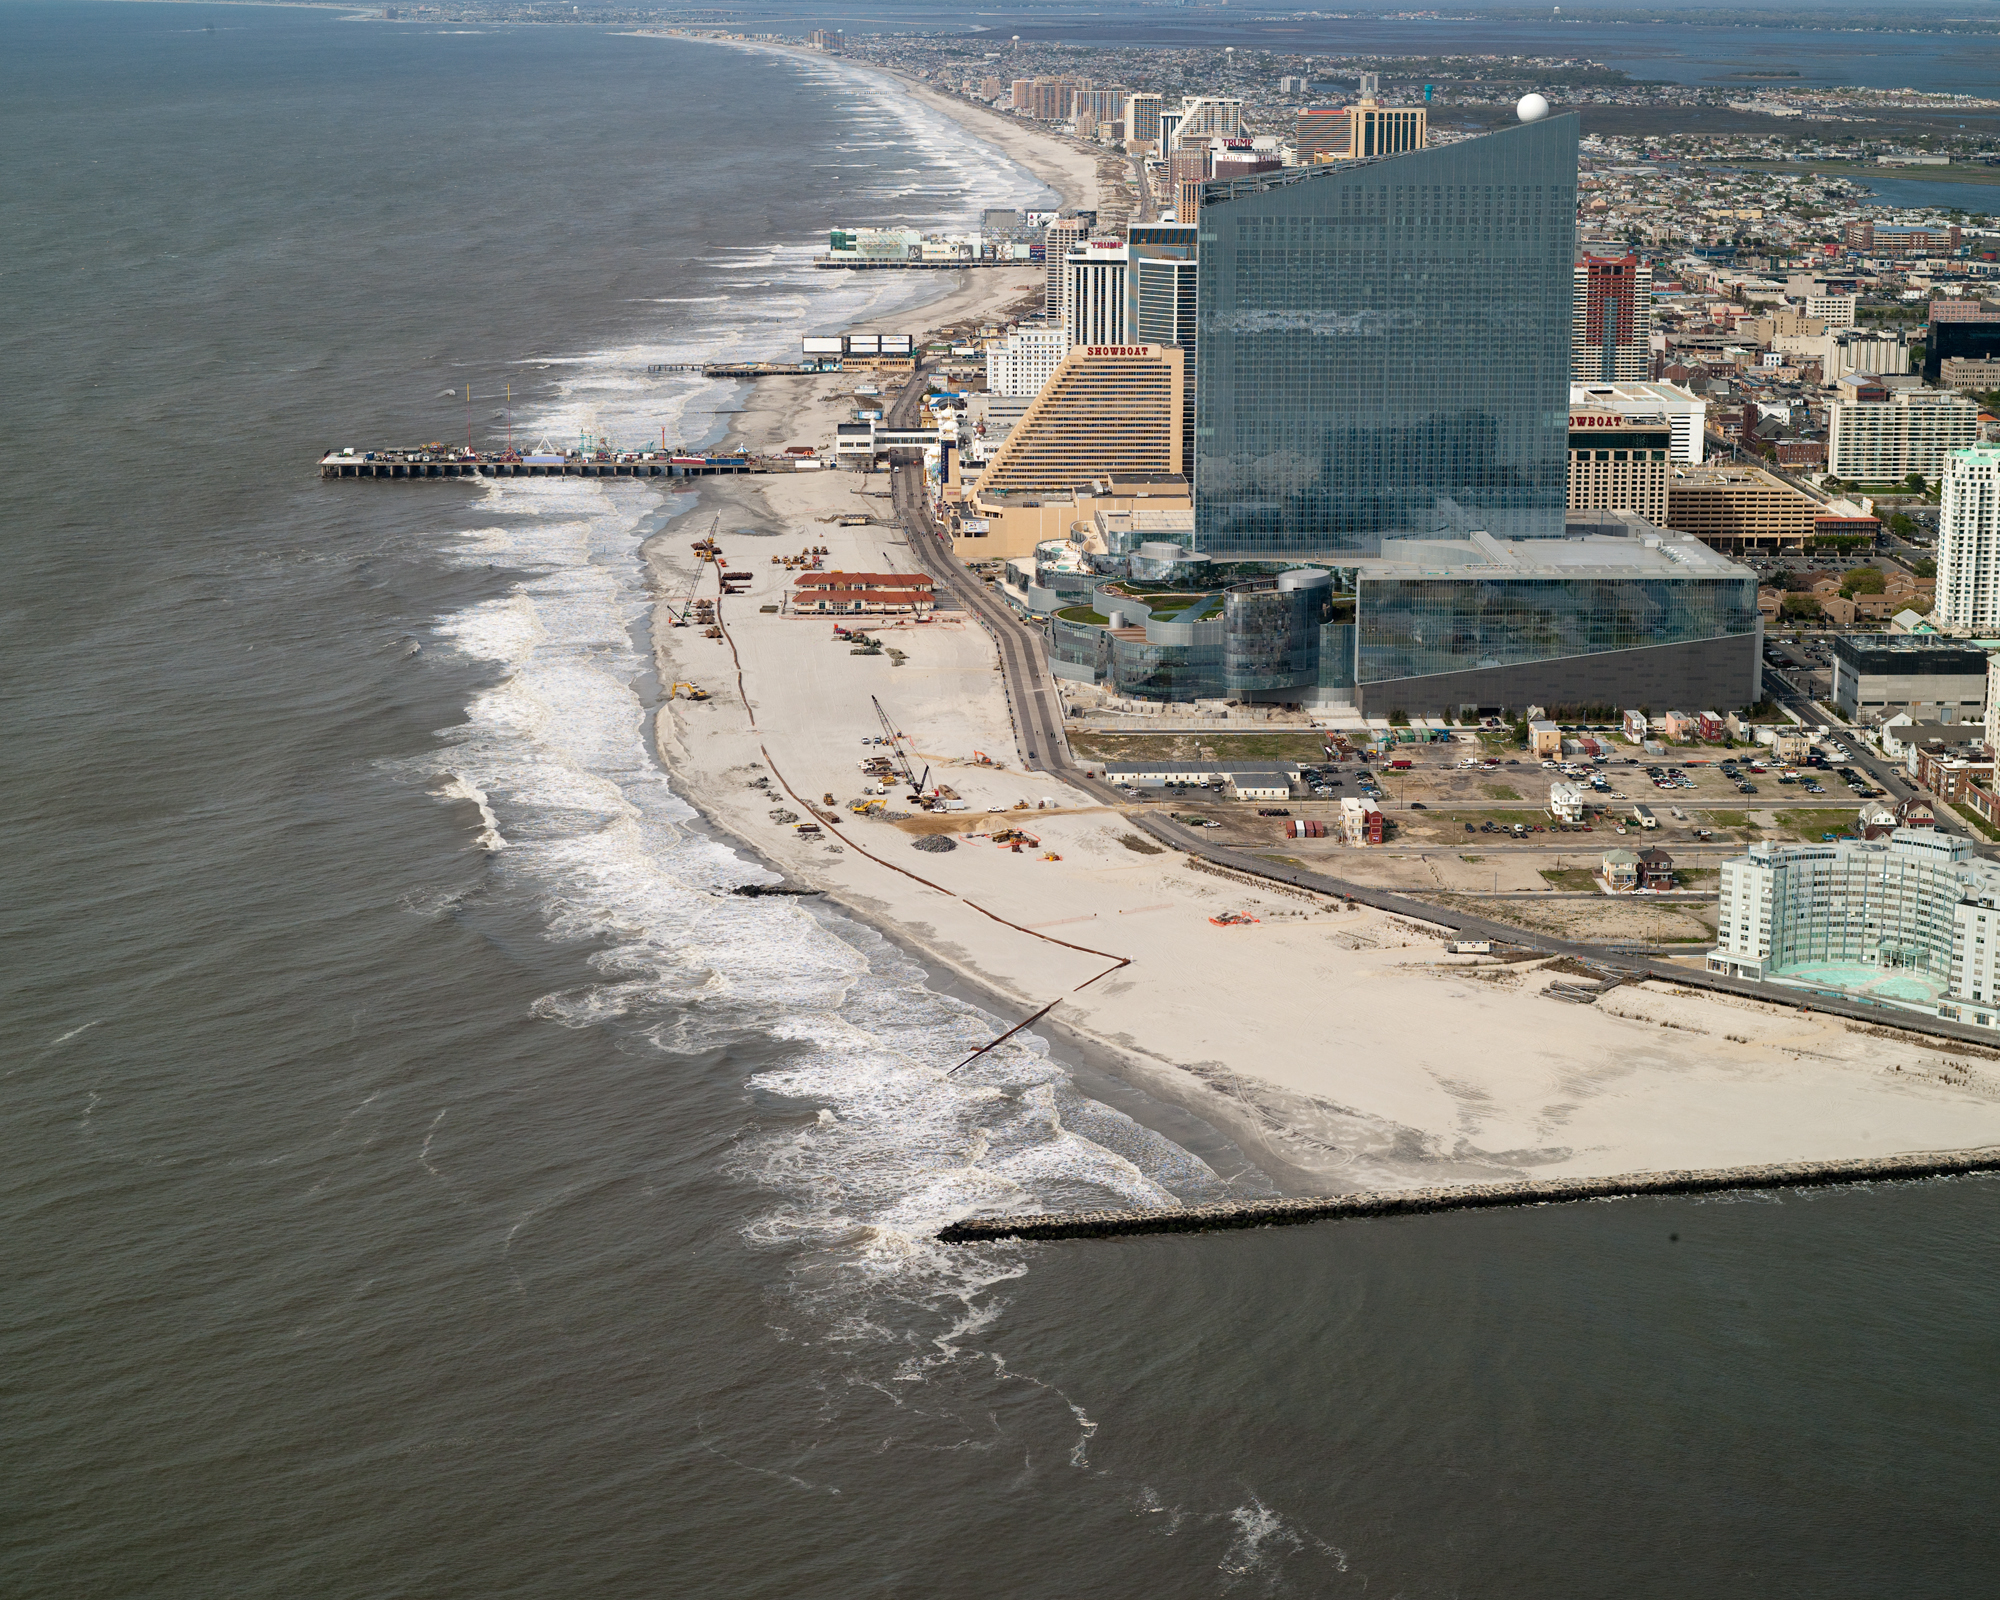 Absecon Island (NJ) Coastal Storm Damage Reduction Project (by US Army Corps of Engineers, public domain).